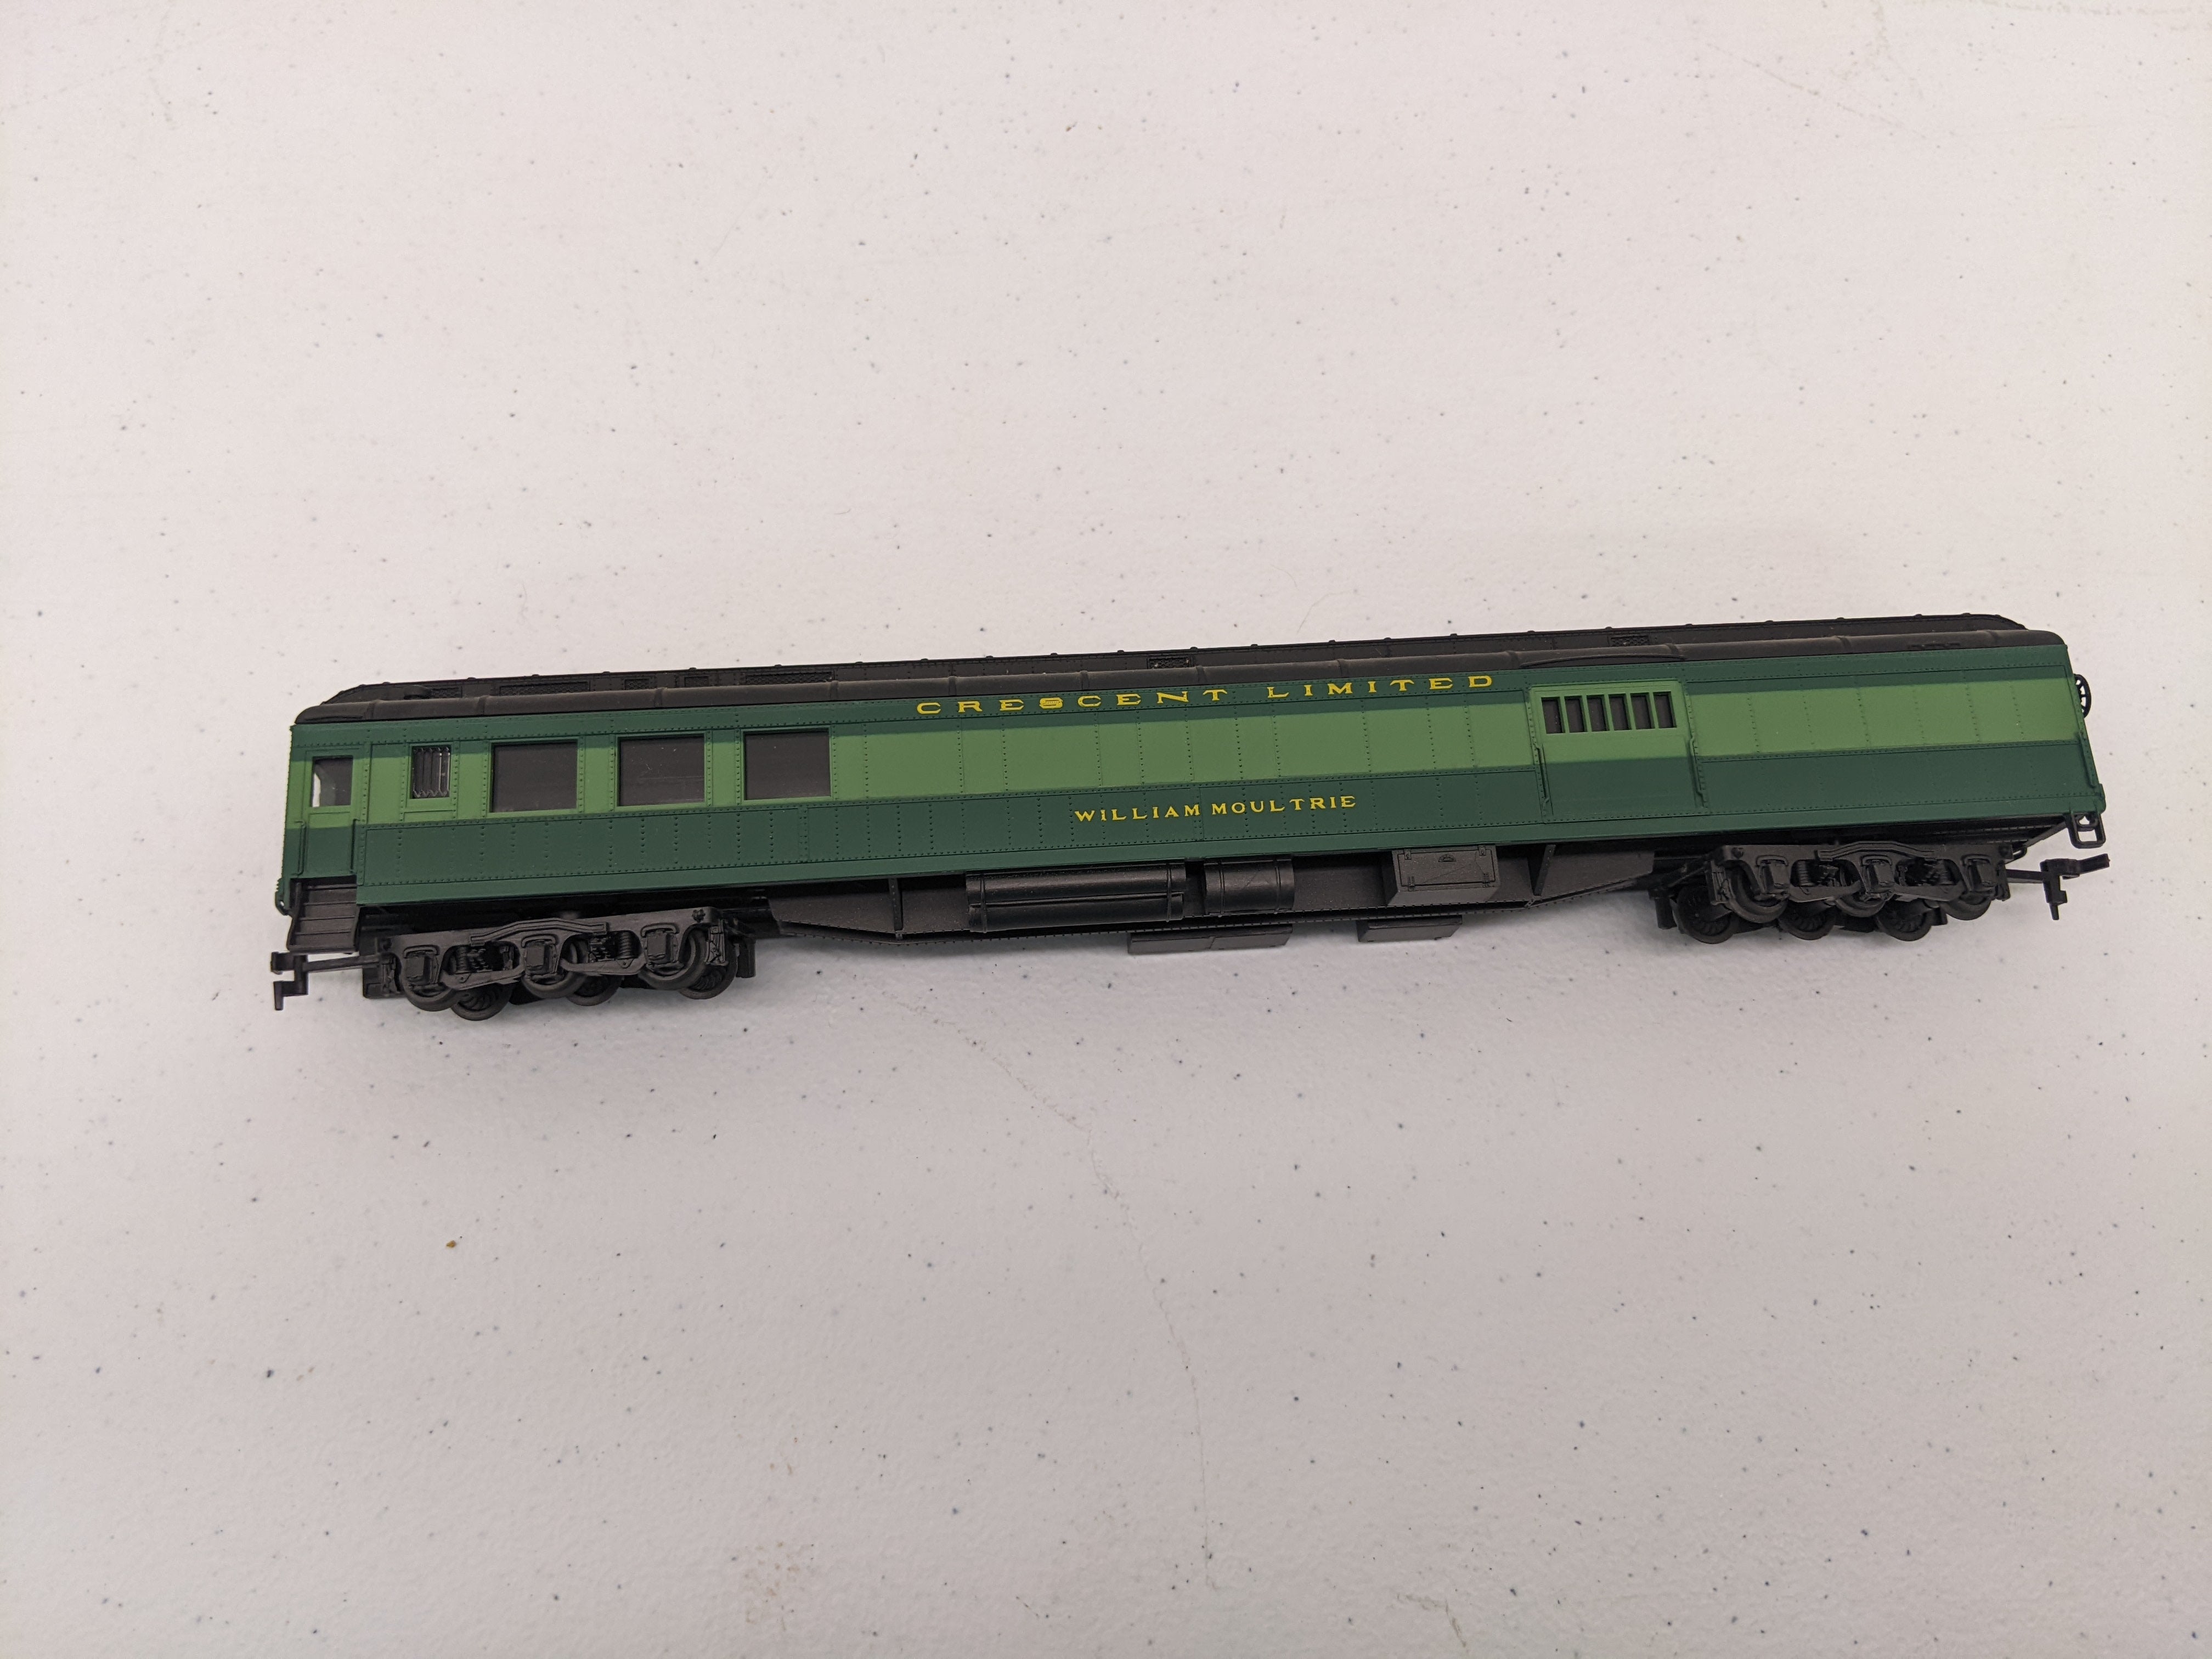 USED Rivarossi HO Scale, Passenger Car, Crescent Limited William Moultrie